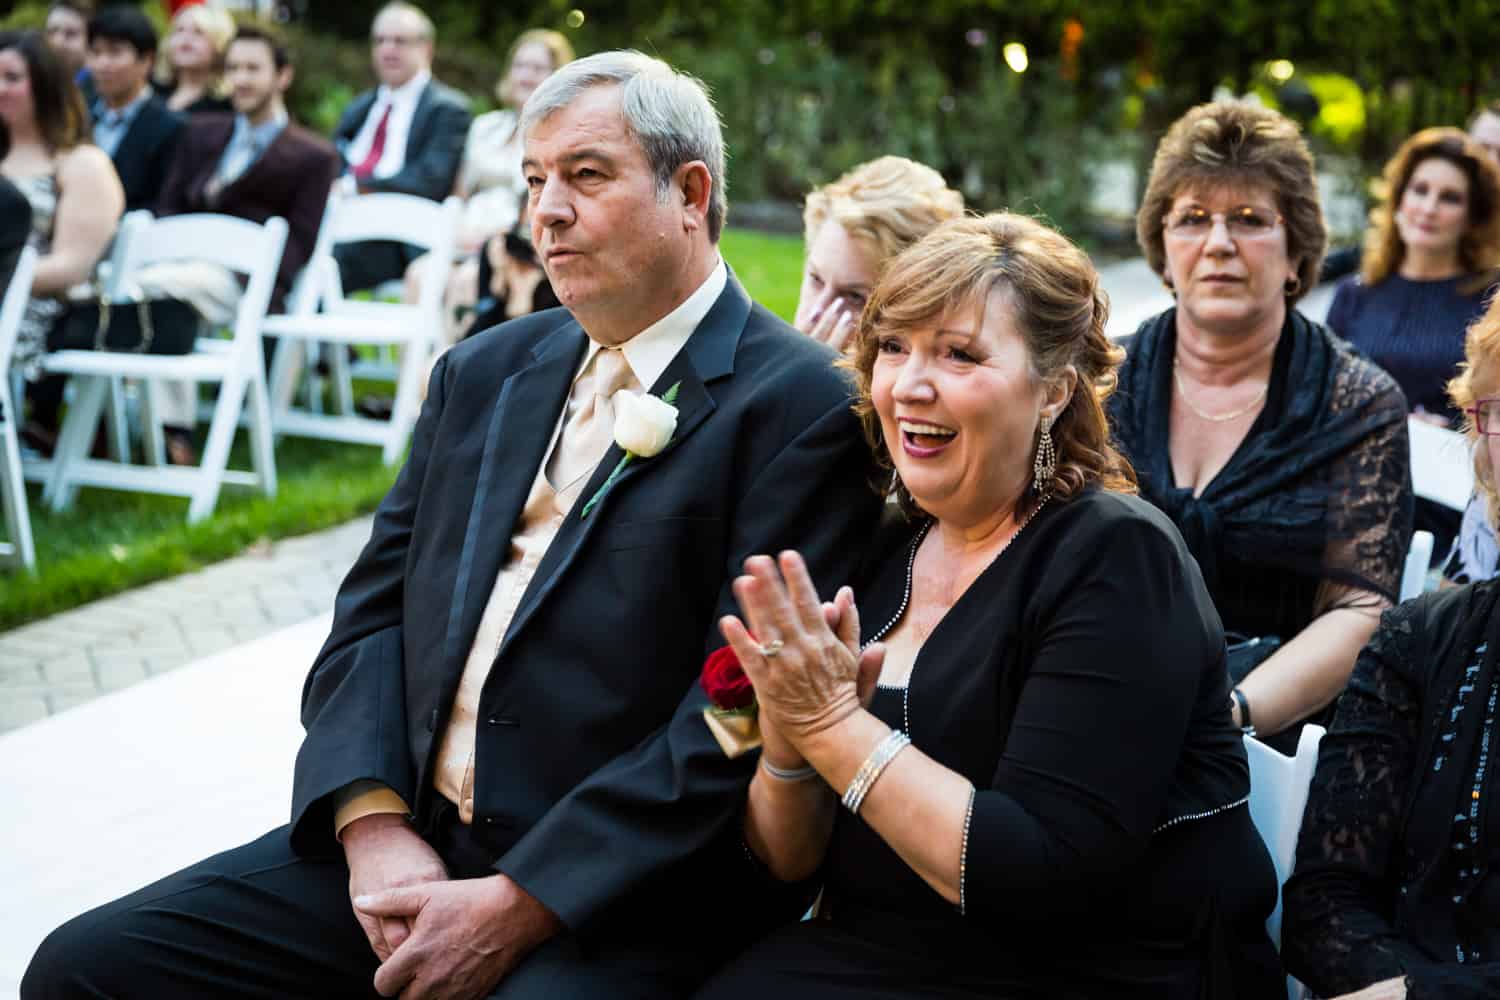 Parents of the bride listening to wedding ceremony